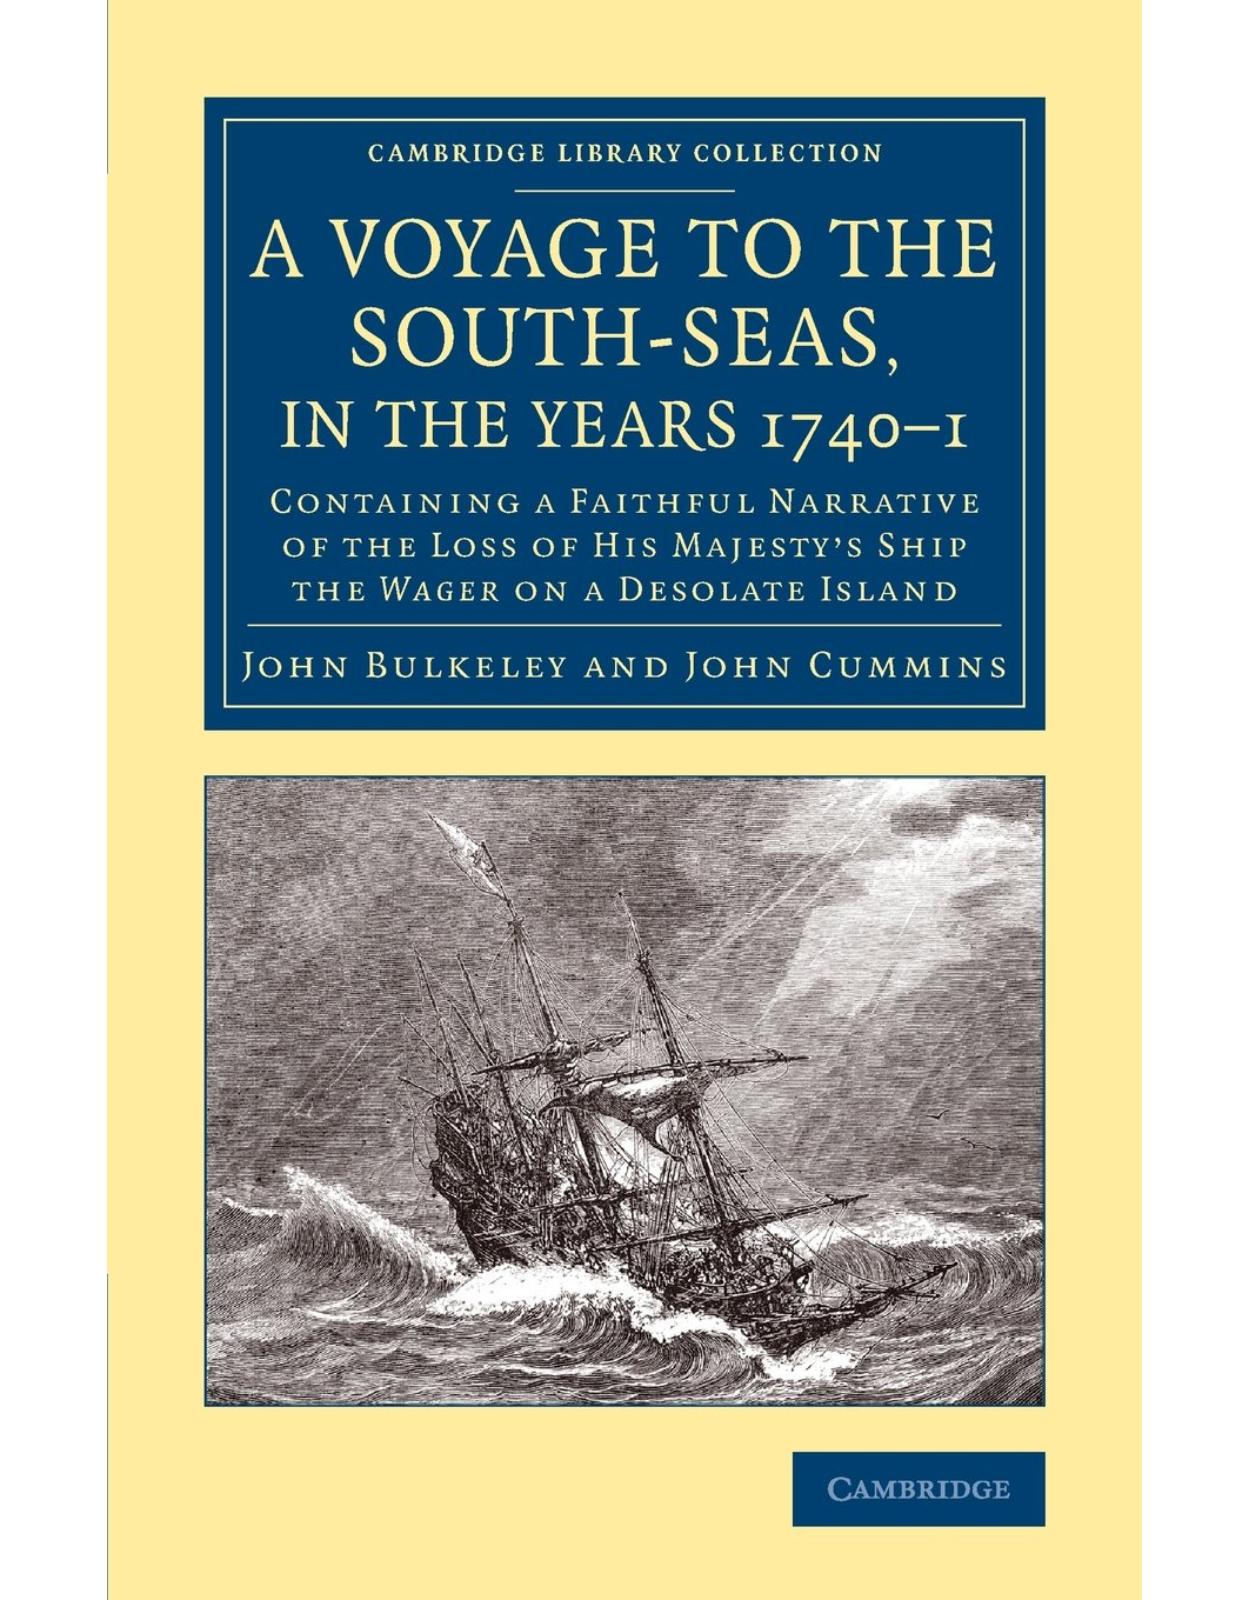 A Voyage to the South-Seas, in the Years 1740-1: Containing a Faithful Narrative of the Loss of His MajestyÂ’s Ship the Wager on a Desolate Island (Cambridge Library Collection - Maritime Exploration)